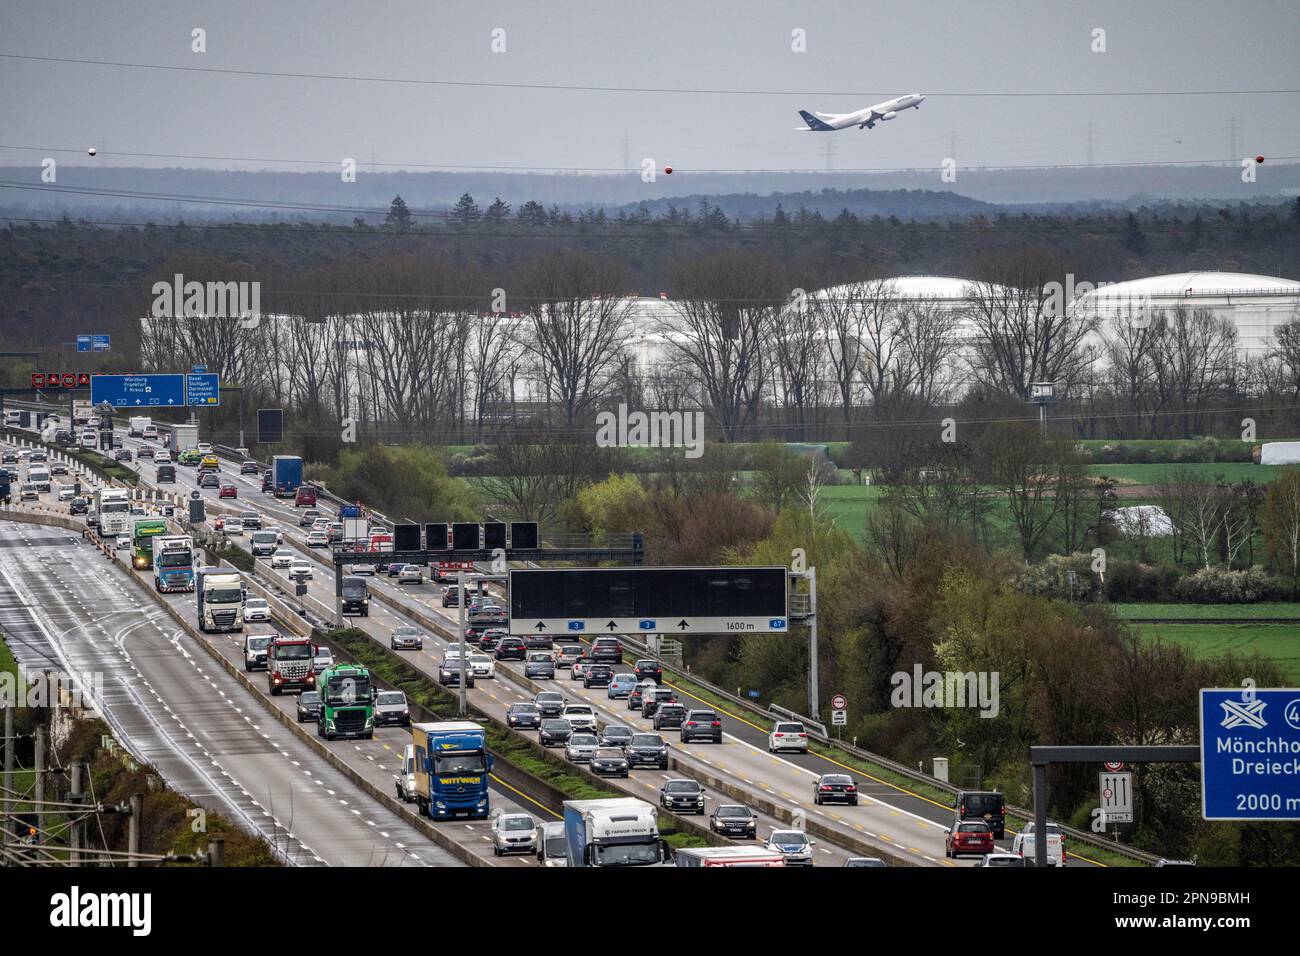 A3 motorway near Flörsheim, before the Mönchhof motorway junction, narrowing of the lanes due to a construction site, aircraft taking off on the west Stock Photo